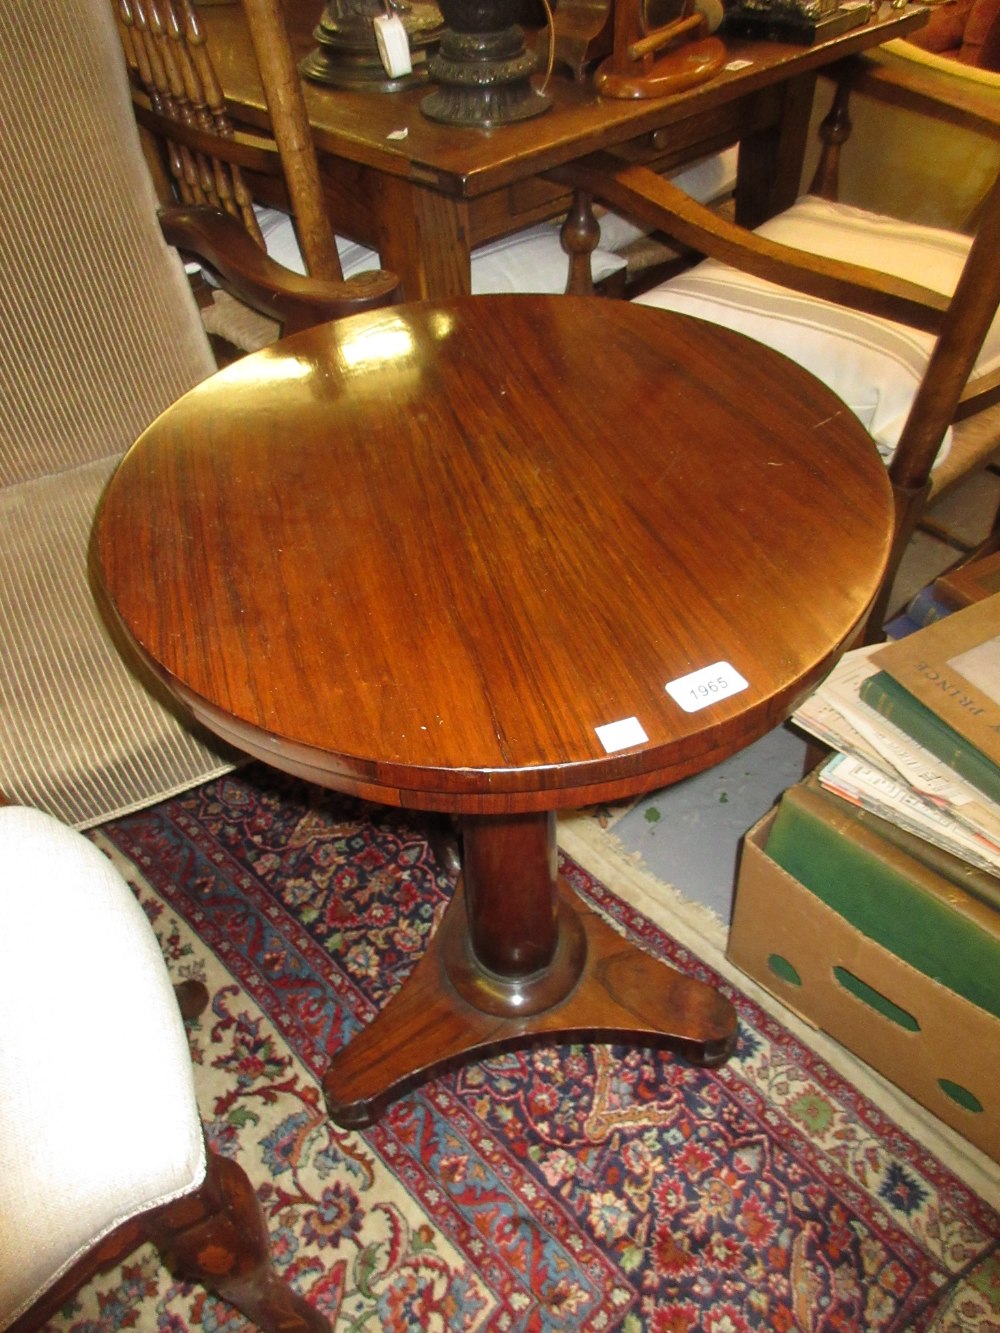 Victorian rosewood circular pedestal table with a plain turned column support and tri form base